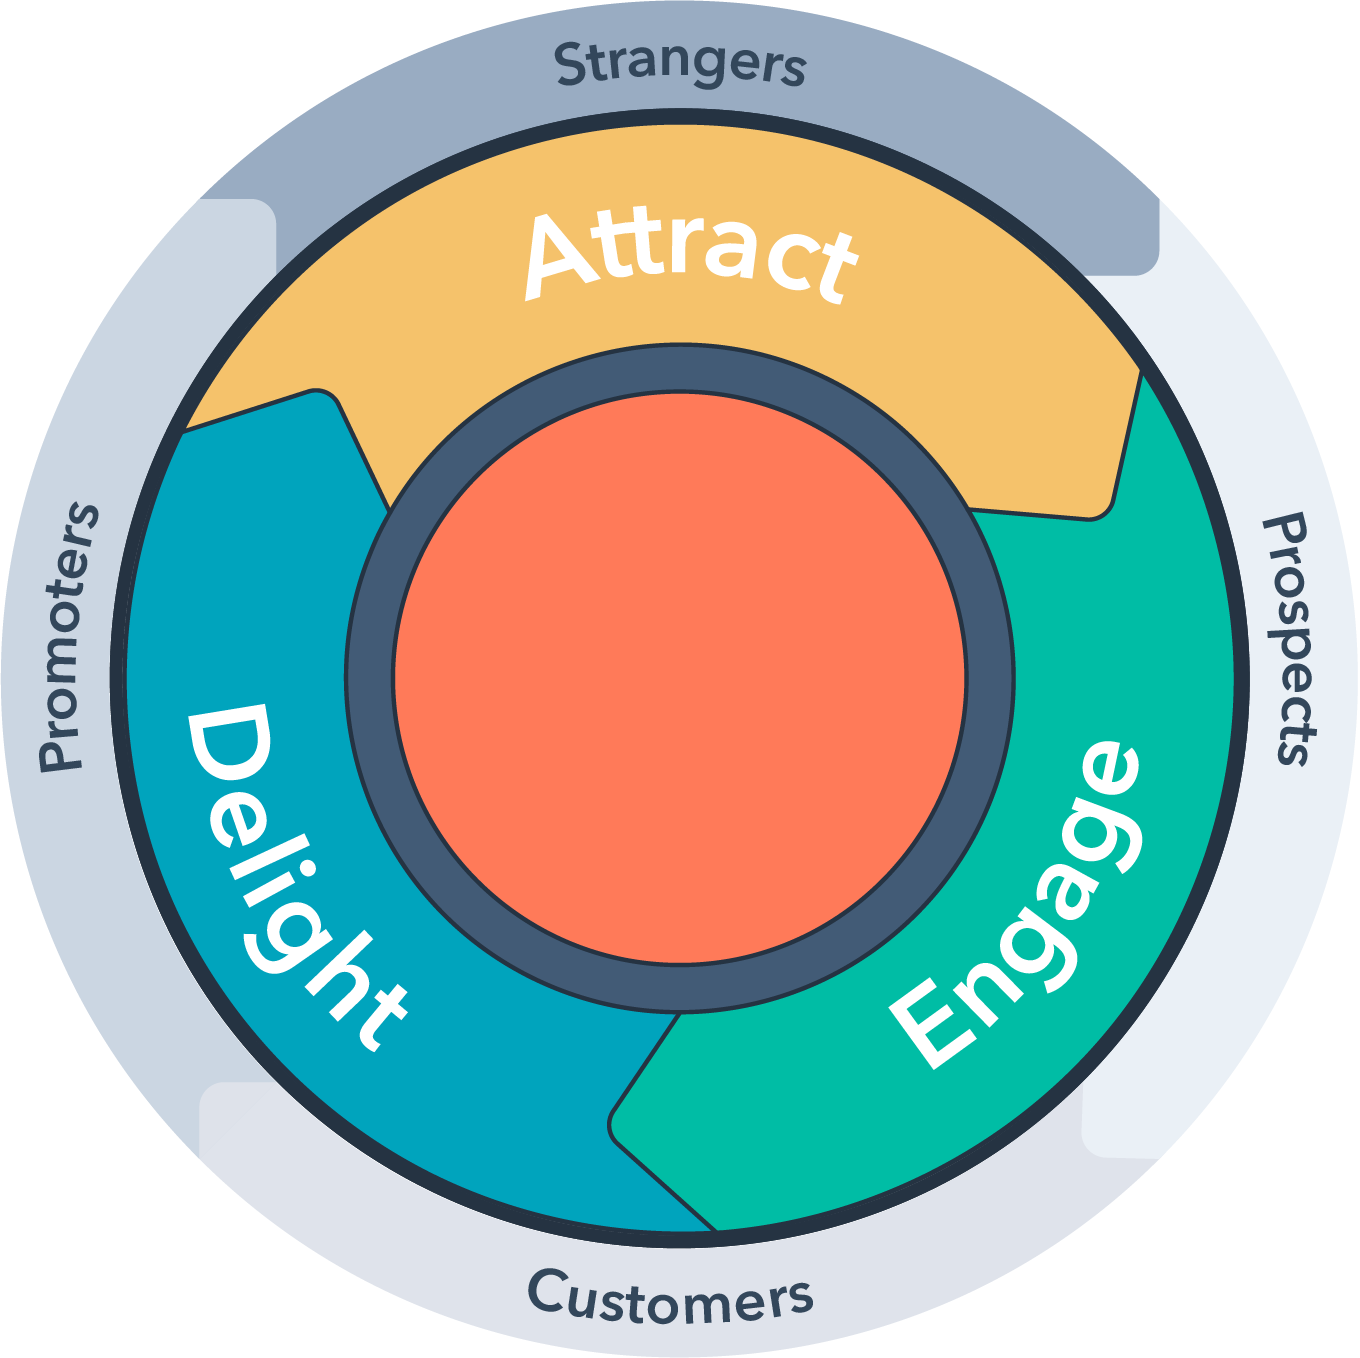 The HubSpot Flywheel. The three phase of the Flywheel surround a central circle, each phase driving each other in turn: "Attract" driving "Engage" driving "Delight" driving "Attract", etc. An outer ring shows "Strangers" becoming "Prospects" becoming "Customers" and then "Promoters" who attract new "Strangers".